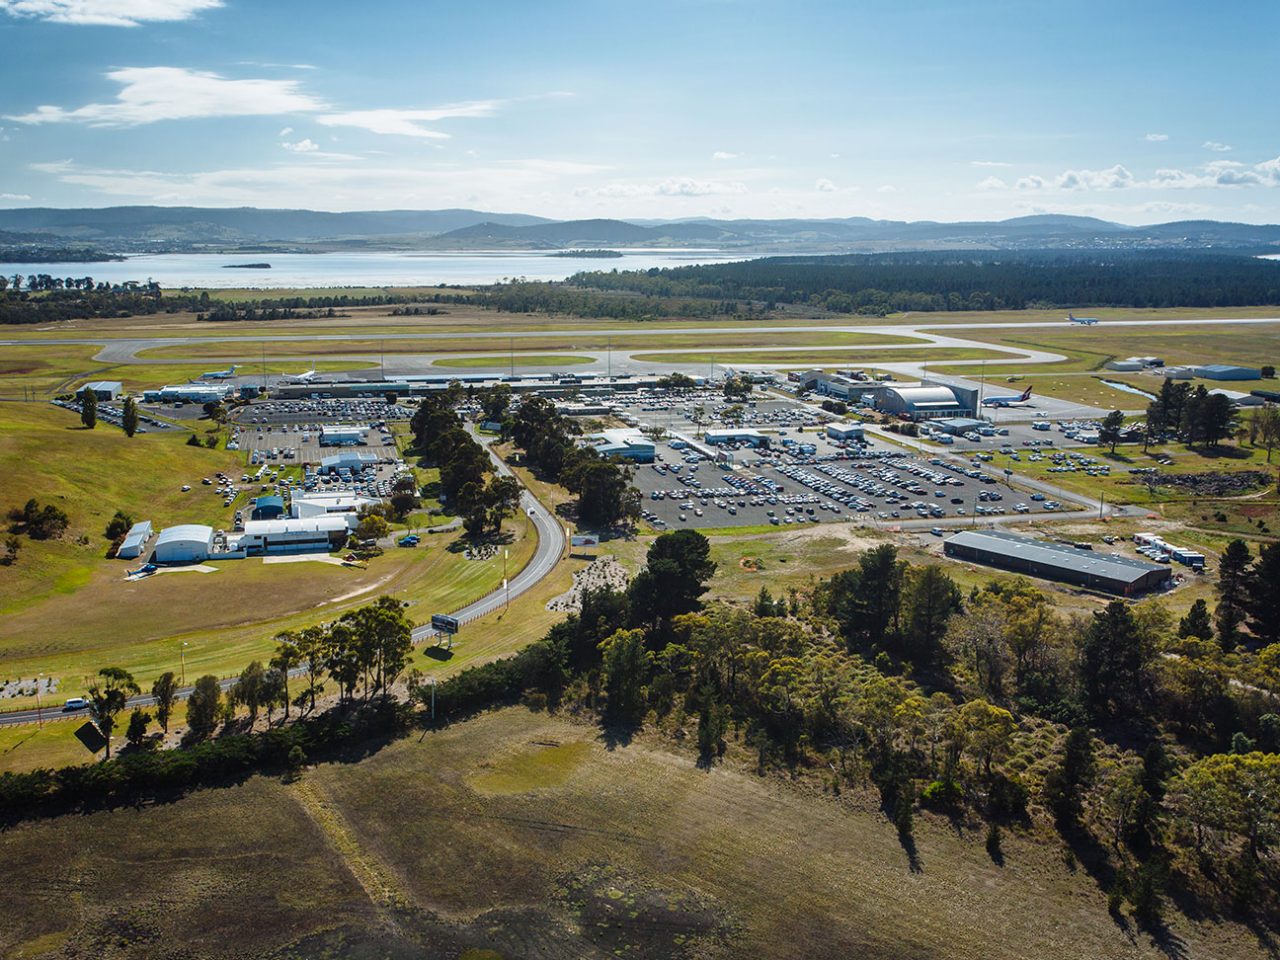 Hobart Airport generates $A150 million in added economic value each year